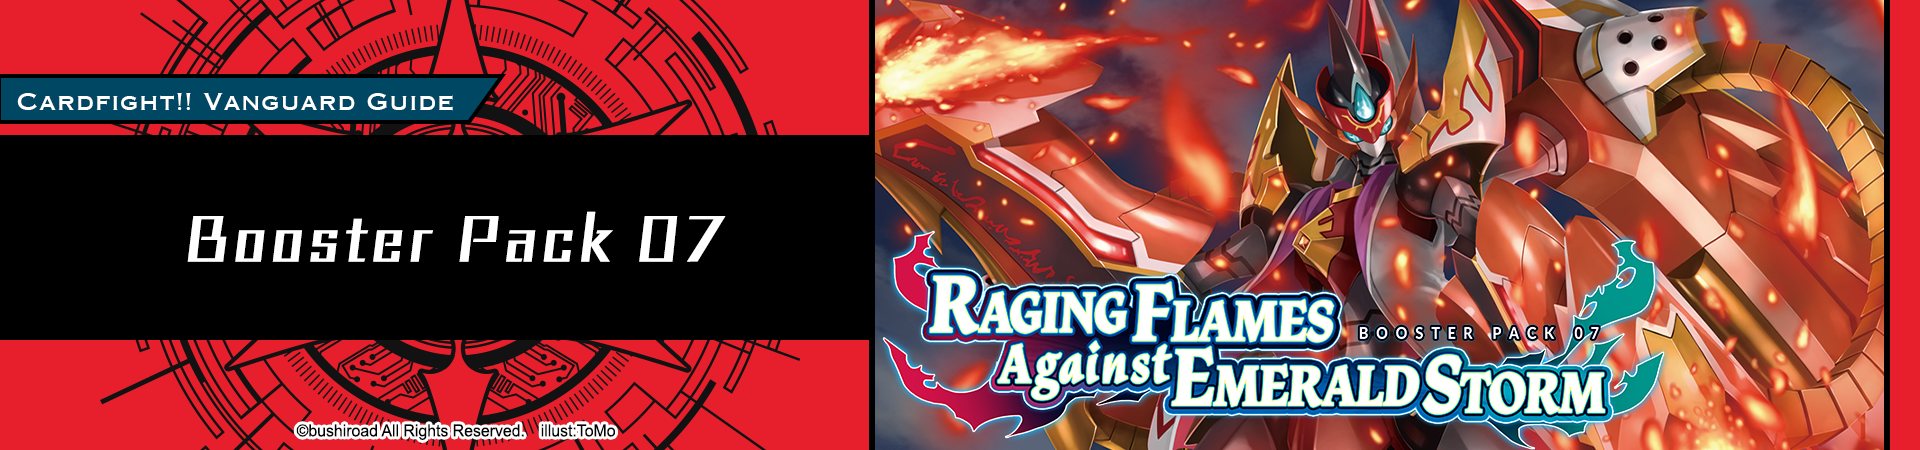  Cardfight!! Vanguard Booster Pack 07: Raging Flames Against Emerald Storm